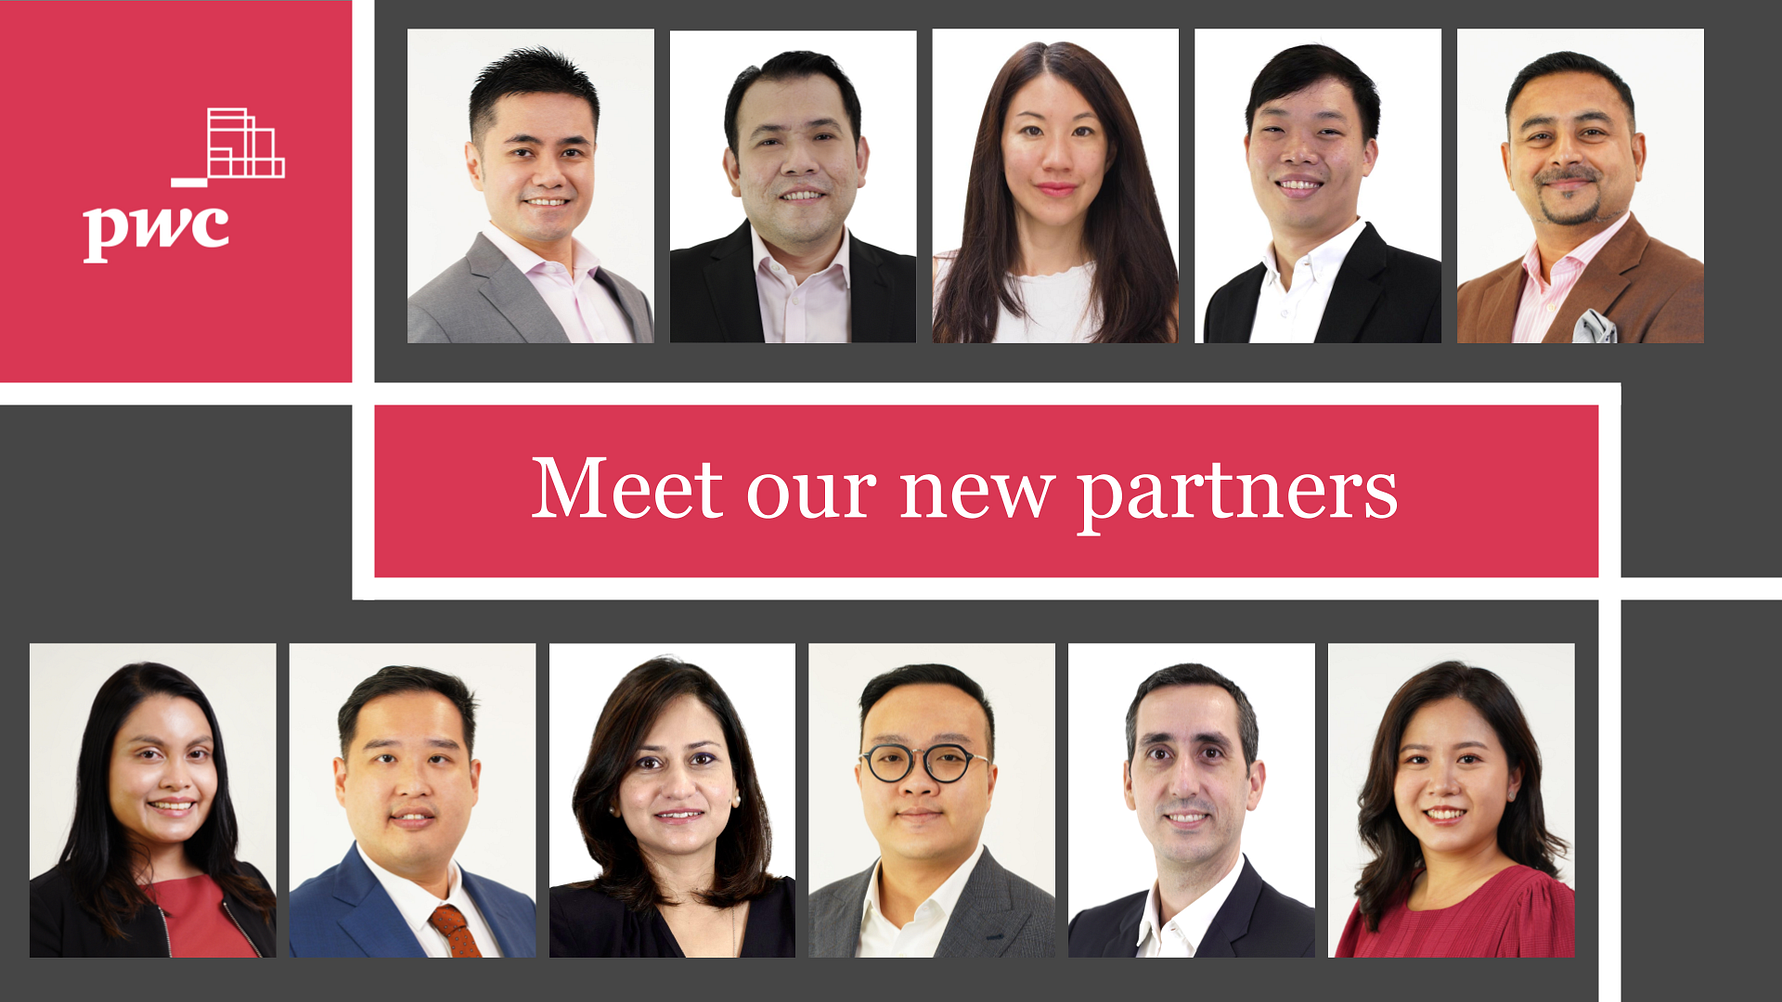 PwC welcomes 11 new partners in Singapore